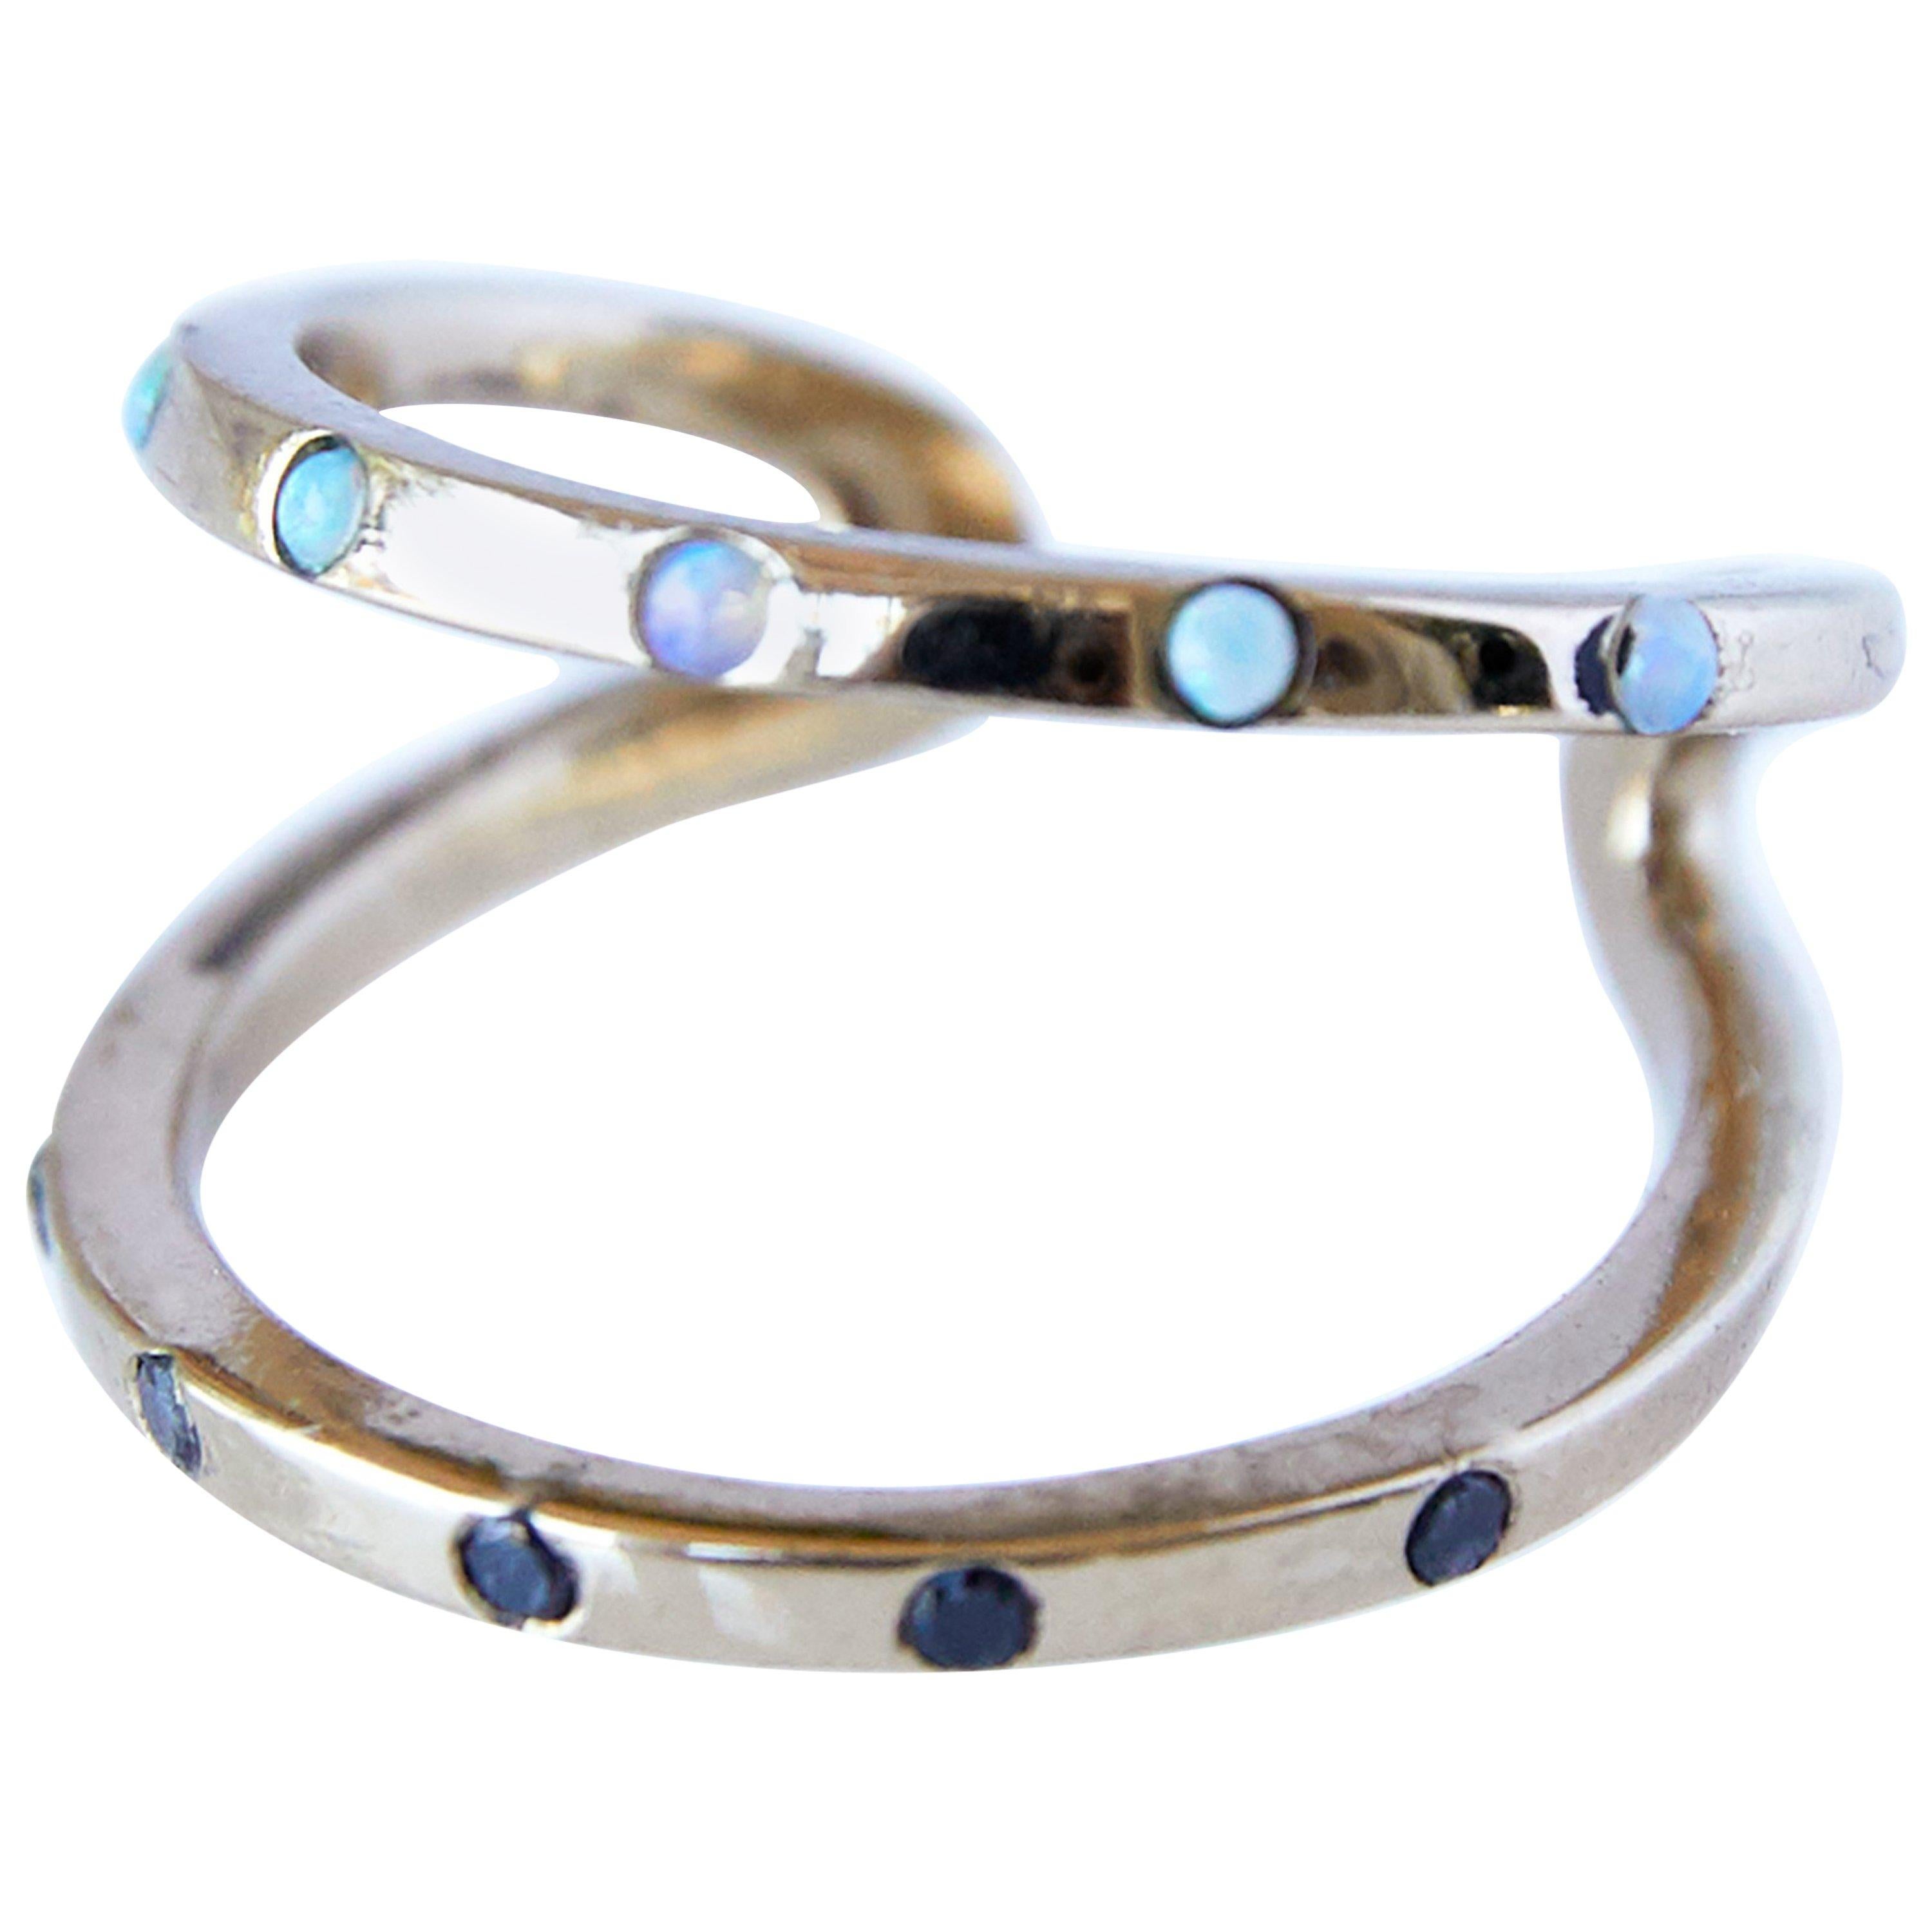 Black Diamond Opal Ring Cocktail Fashion Ring Bronze One size J Dauphin For Sale